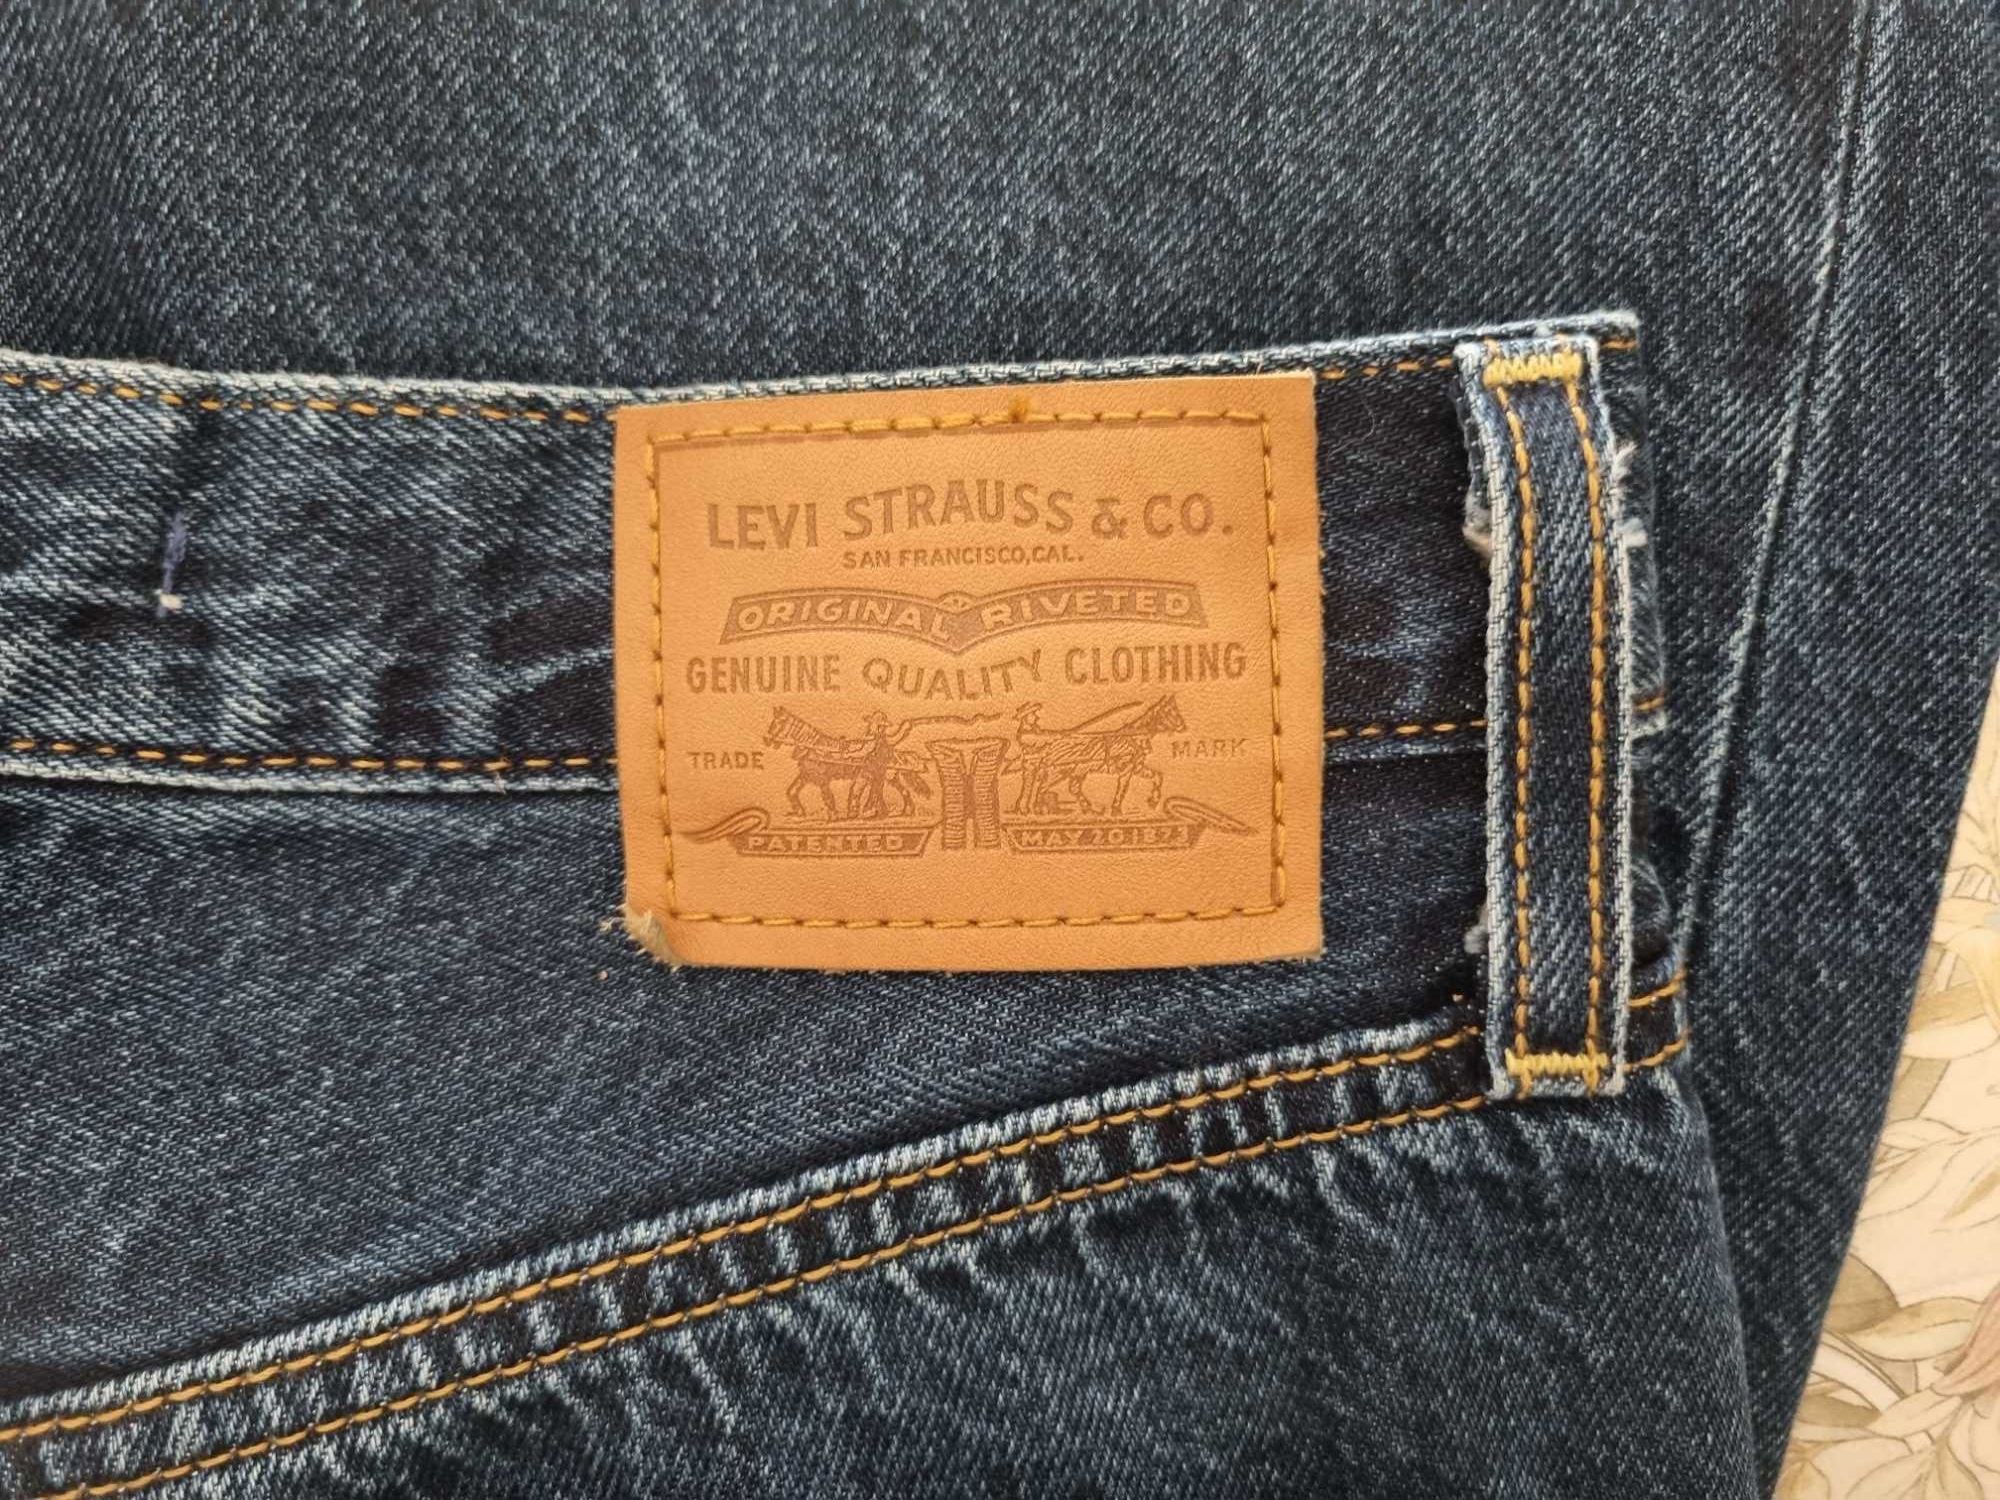 Levis ribcage straight ankle jeans